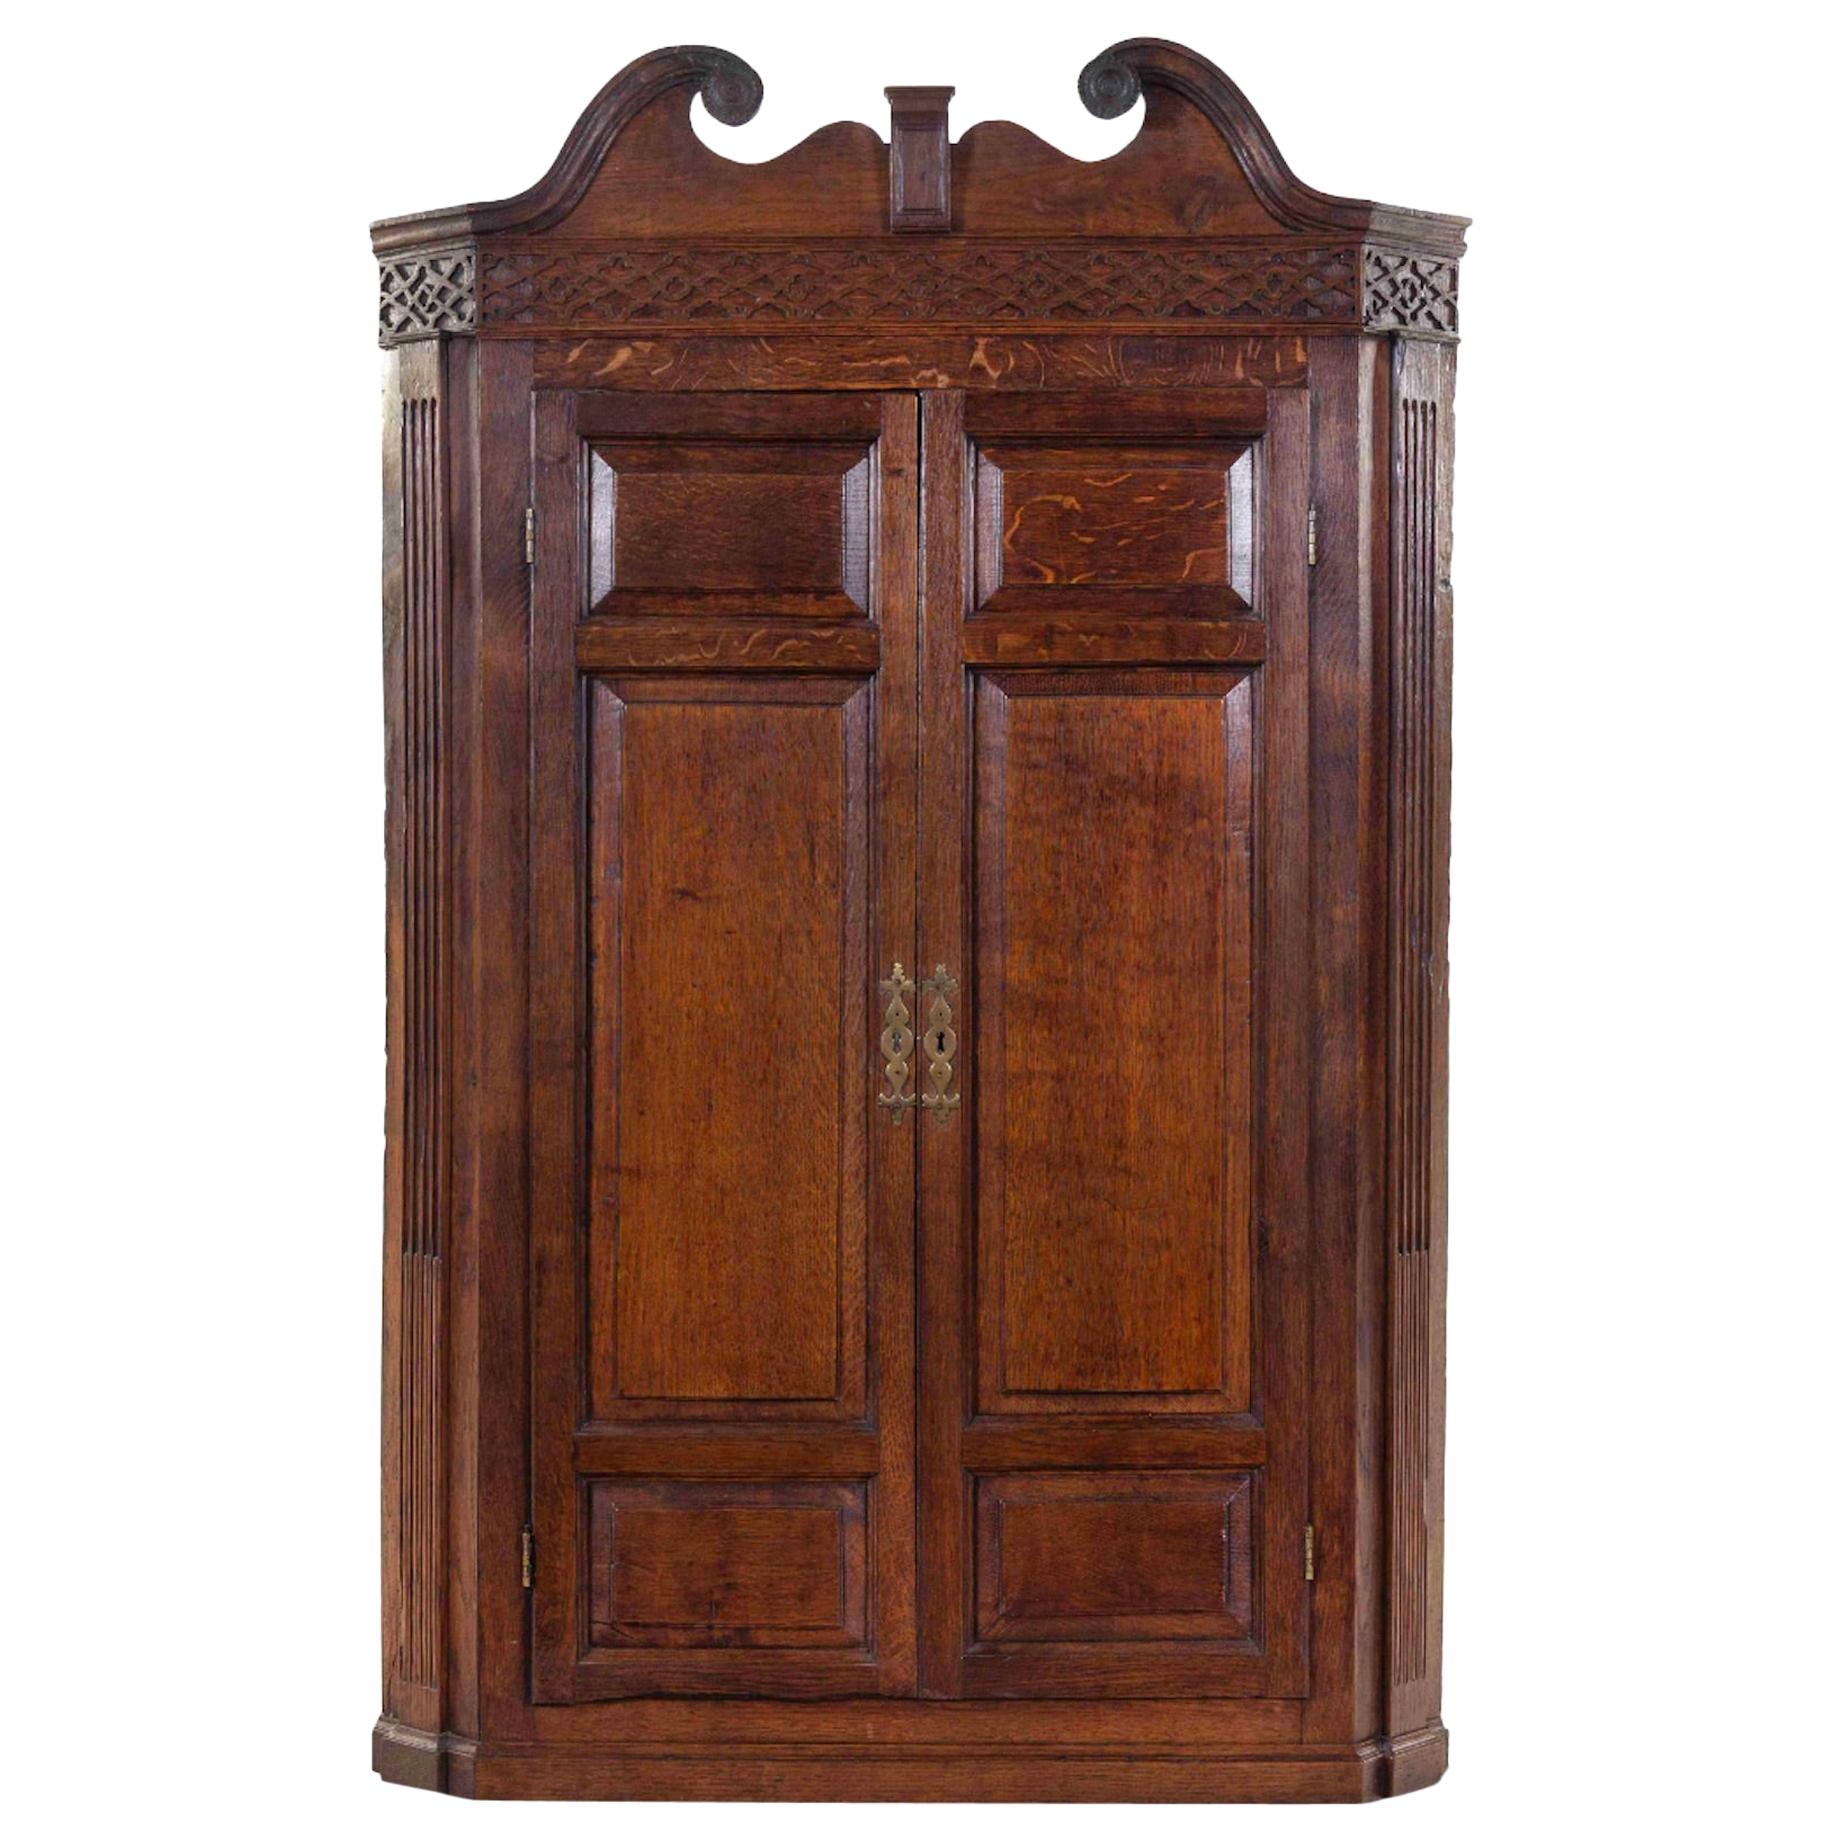 George III Oak Hanging Corner Cabinet, Great Scale, Color and Proportions